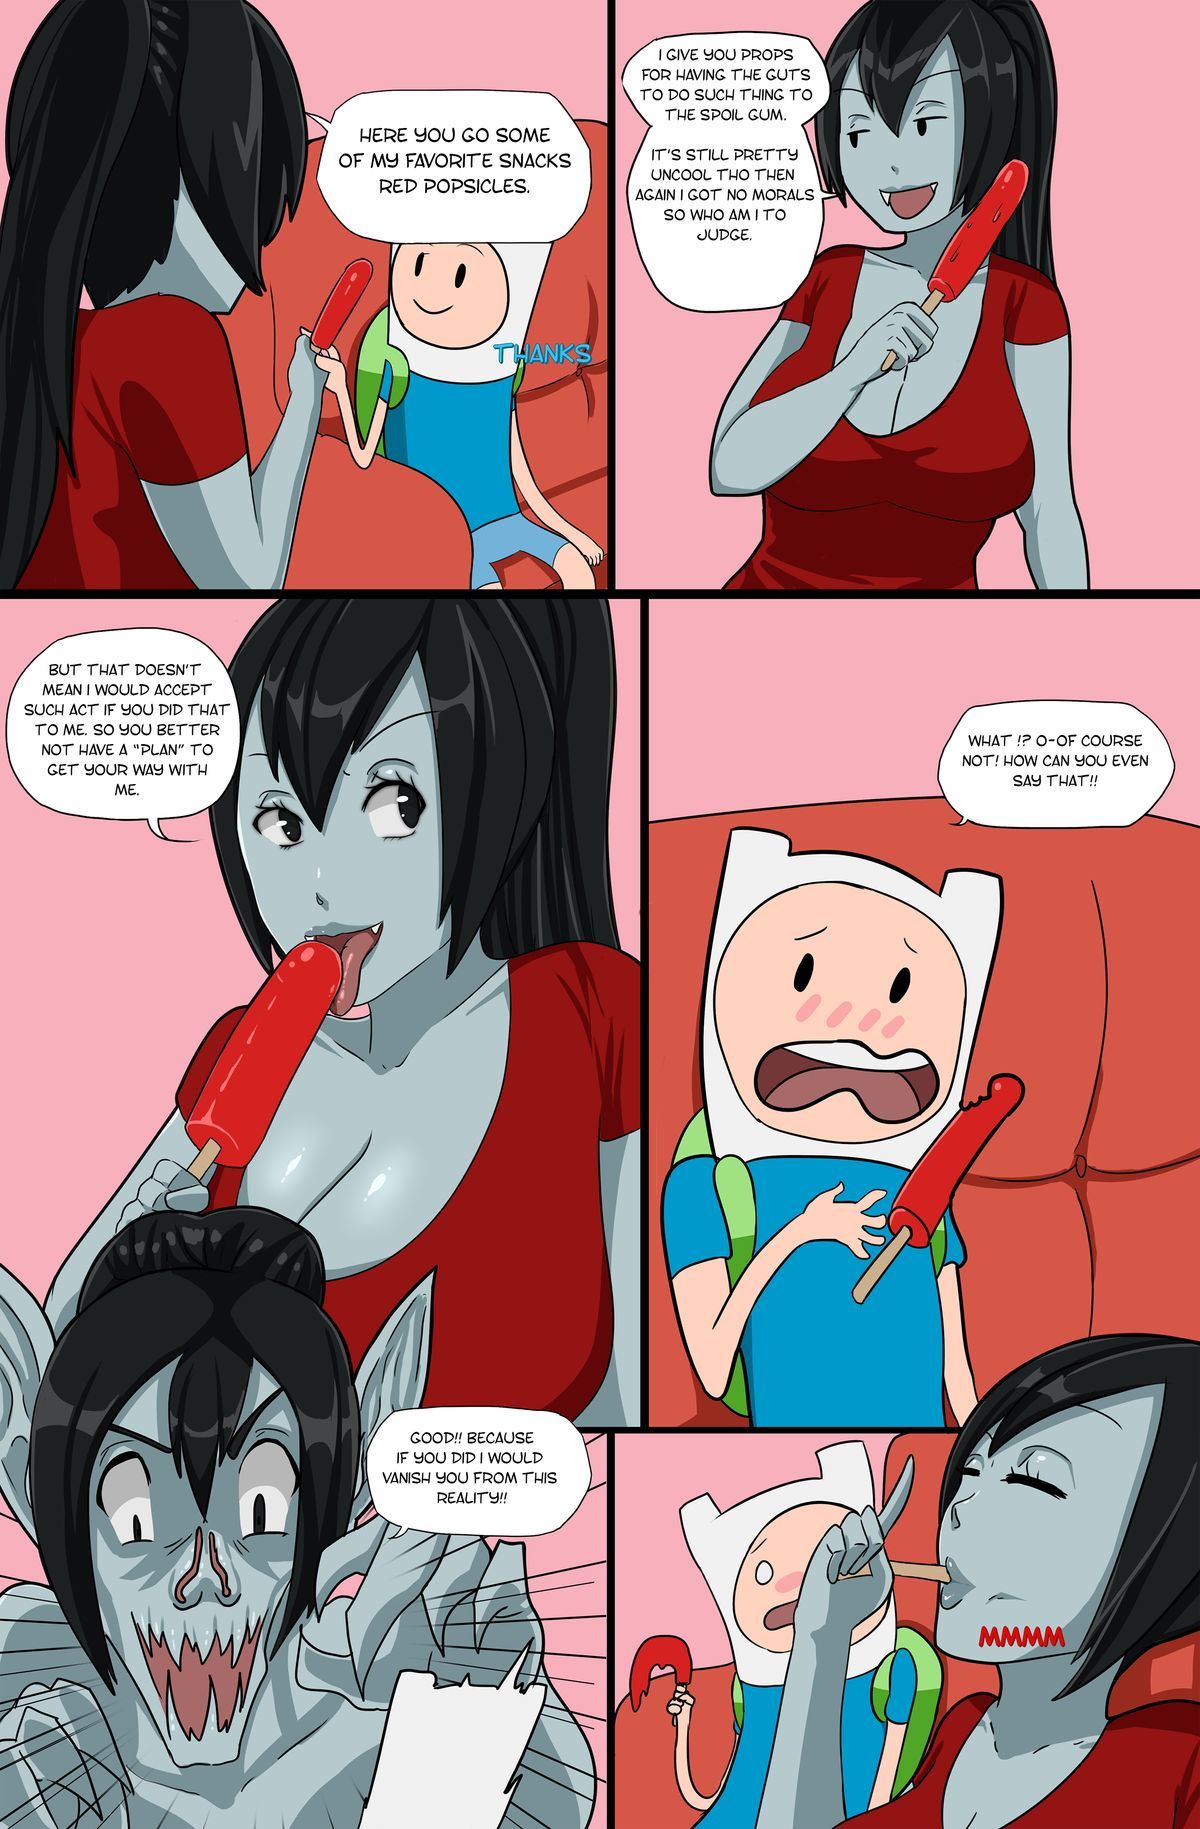 [Dipdoodle]_Adventure_Time_-_Desire_For_the_Color_Lust comix_59889.jpg